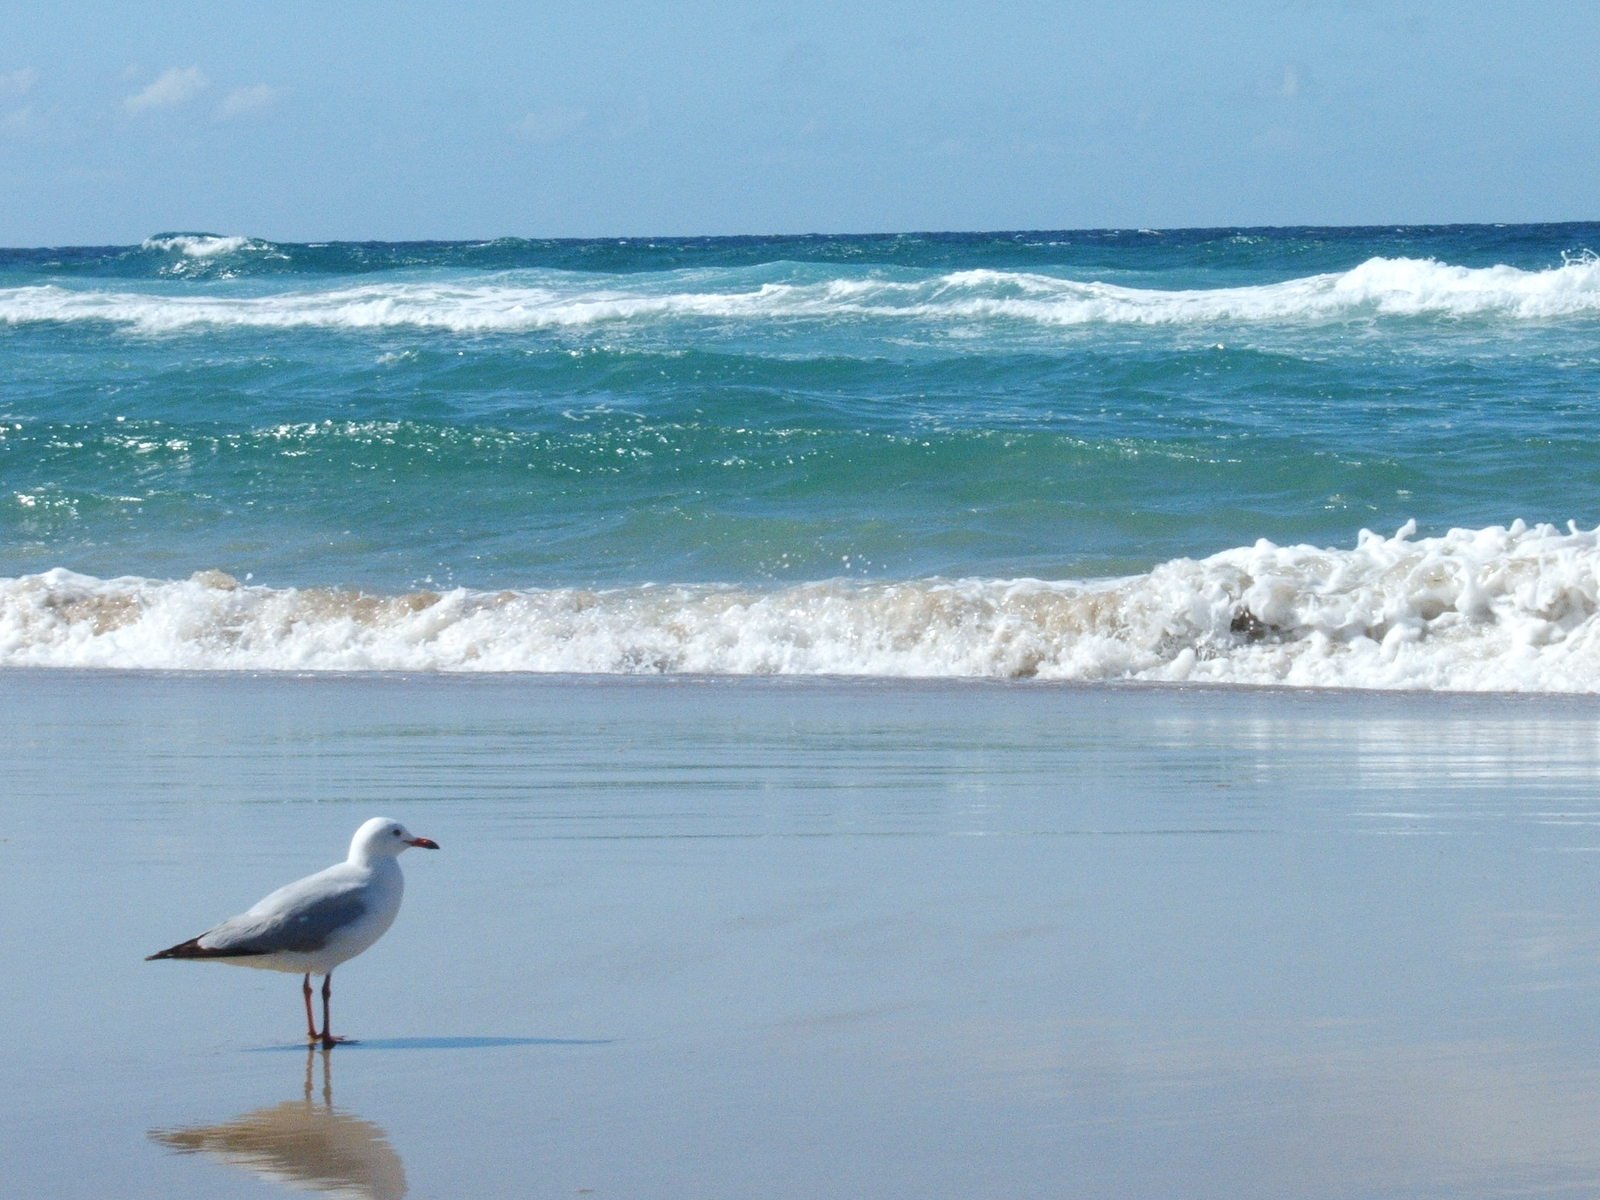 a seagull stands in the sand as waves crash on the beach